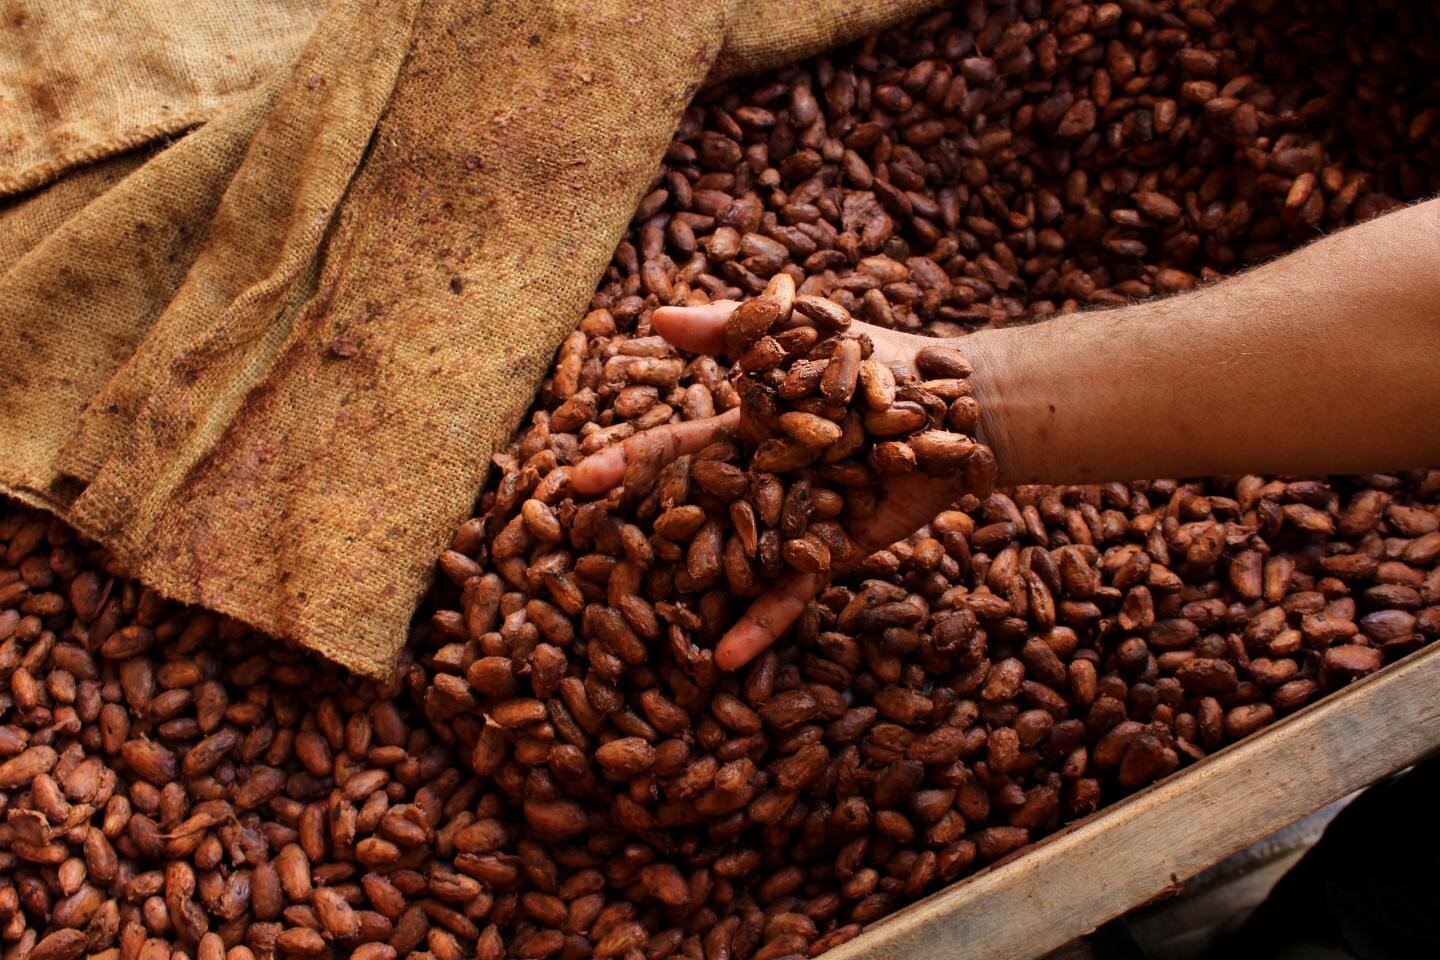 EU lawmakers call for pact on cocoa prices with Ivory Coast and Ghana